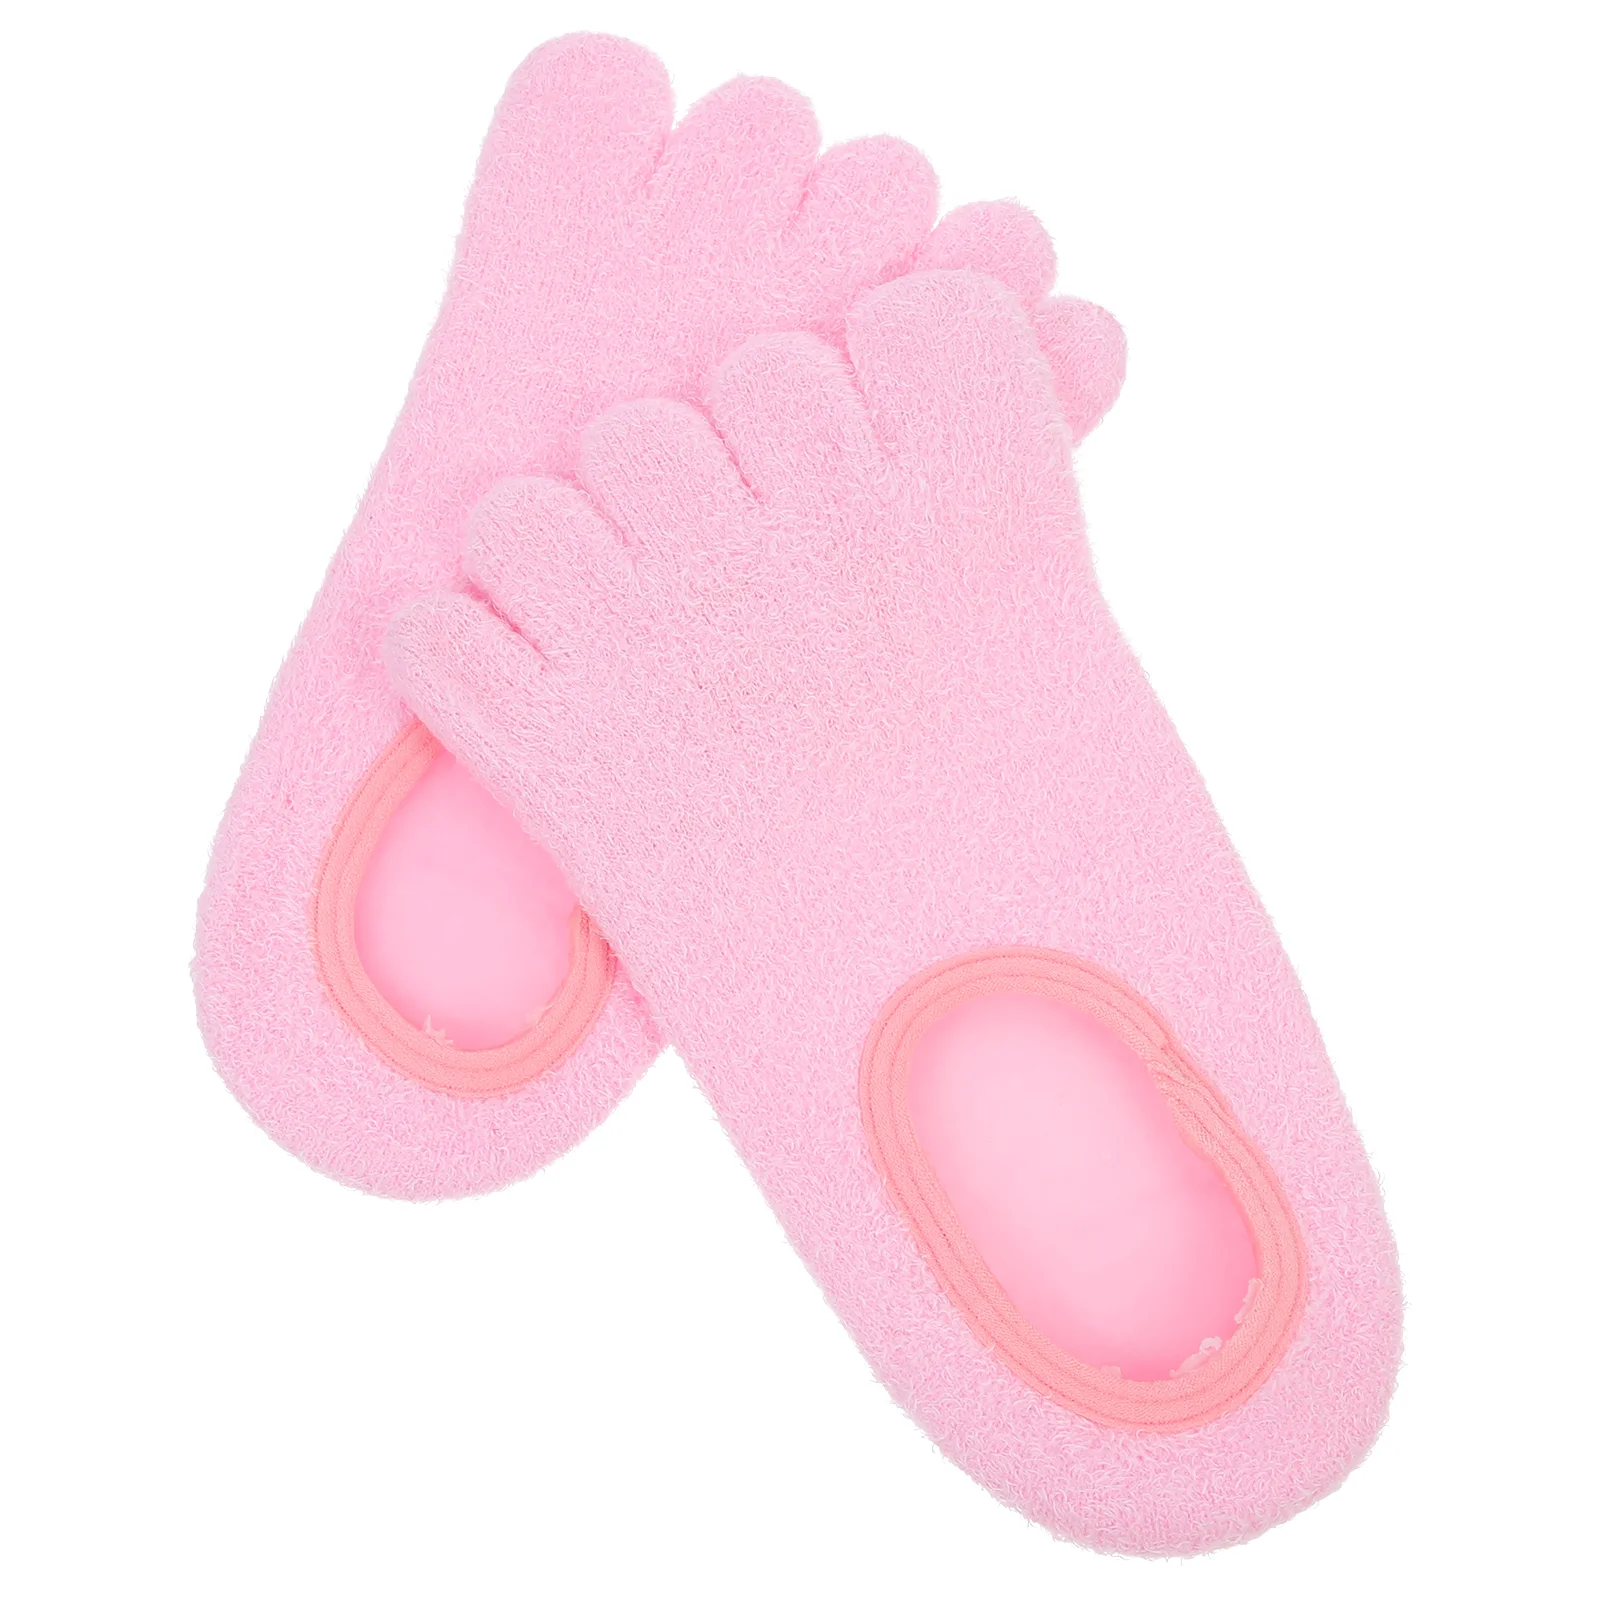 1 Pair Moisturizing Foot Mask Foot Essential Oil Care Products Foot Care Supplies